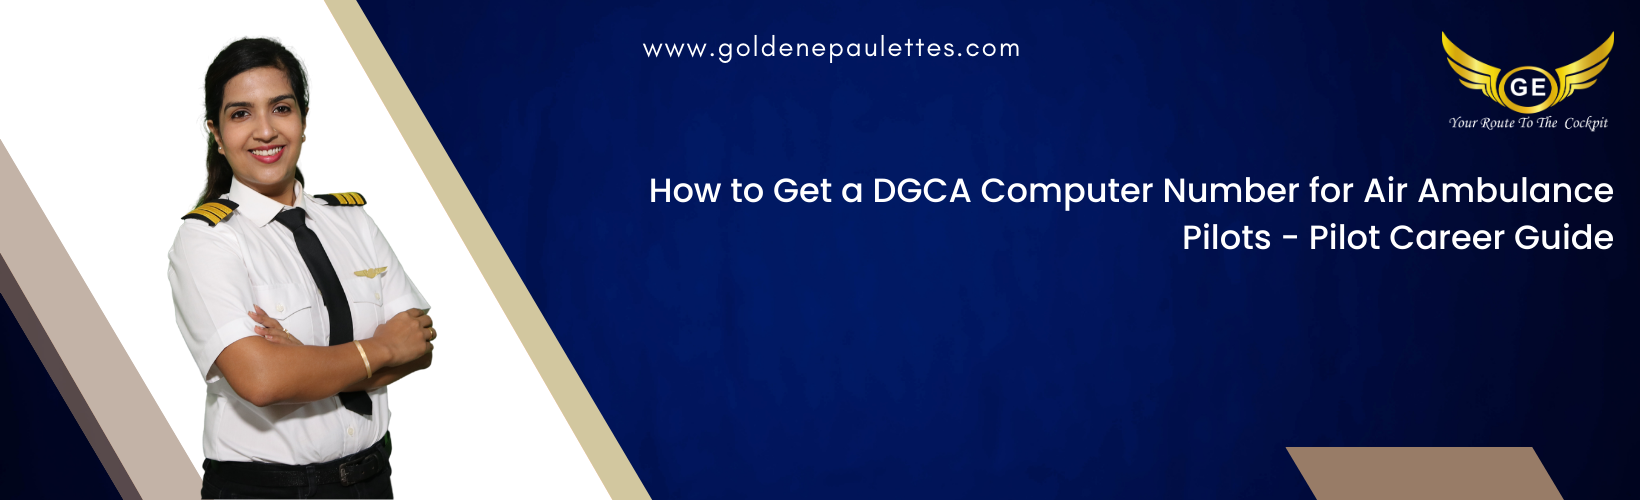 How to Obtain a DGCA Computer Number for Air Ambulance Pilots